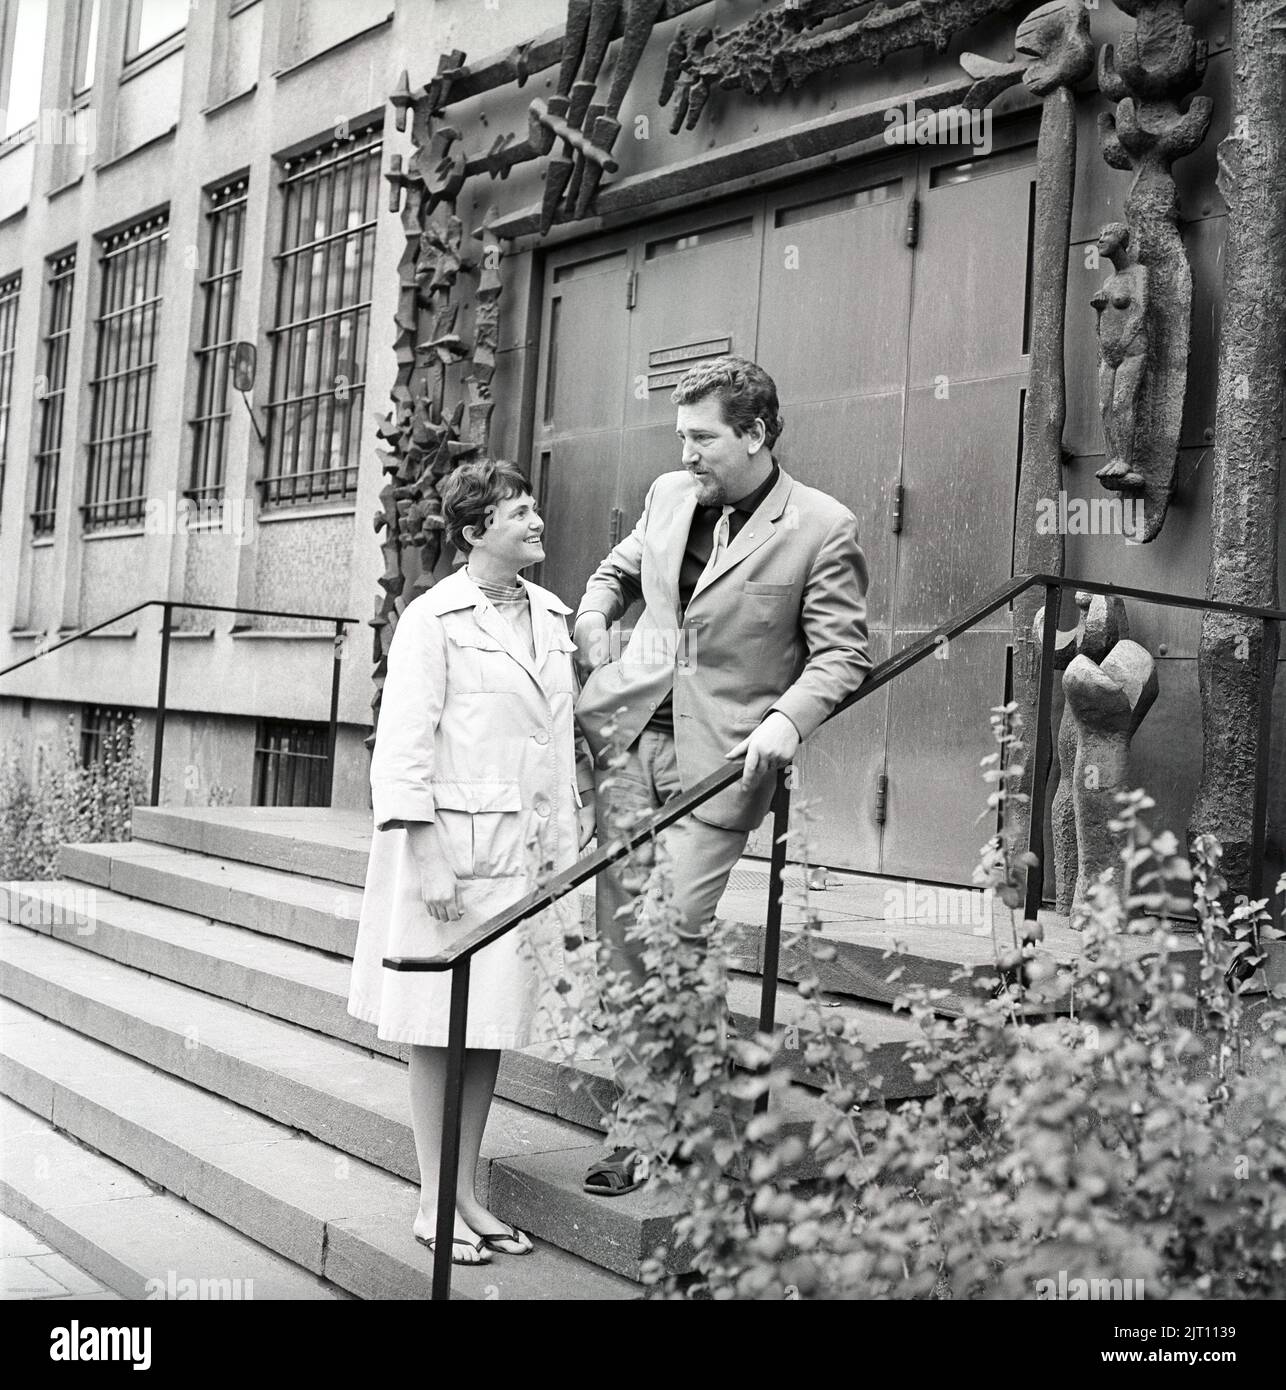 Per Wahloo and Maj Sjowall. Author couple and lif companions collaborative on the ten novels about the explits of police detective Martin Beck. The books have been translated into many languages and been filmed. Pictured on the doorstep of the swedish police on september 6 1966. Stock Photo